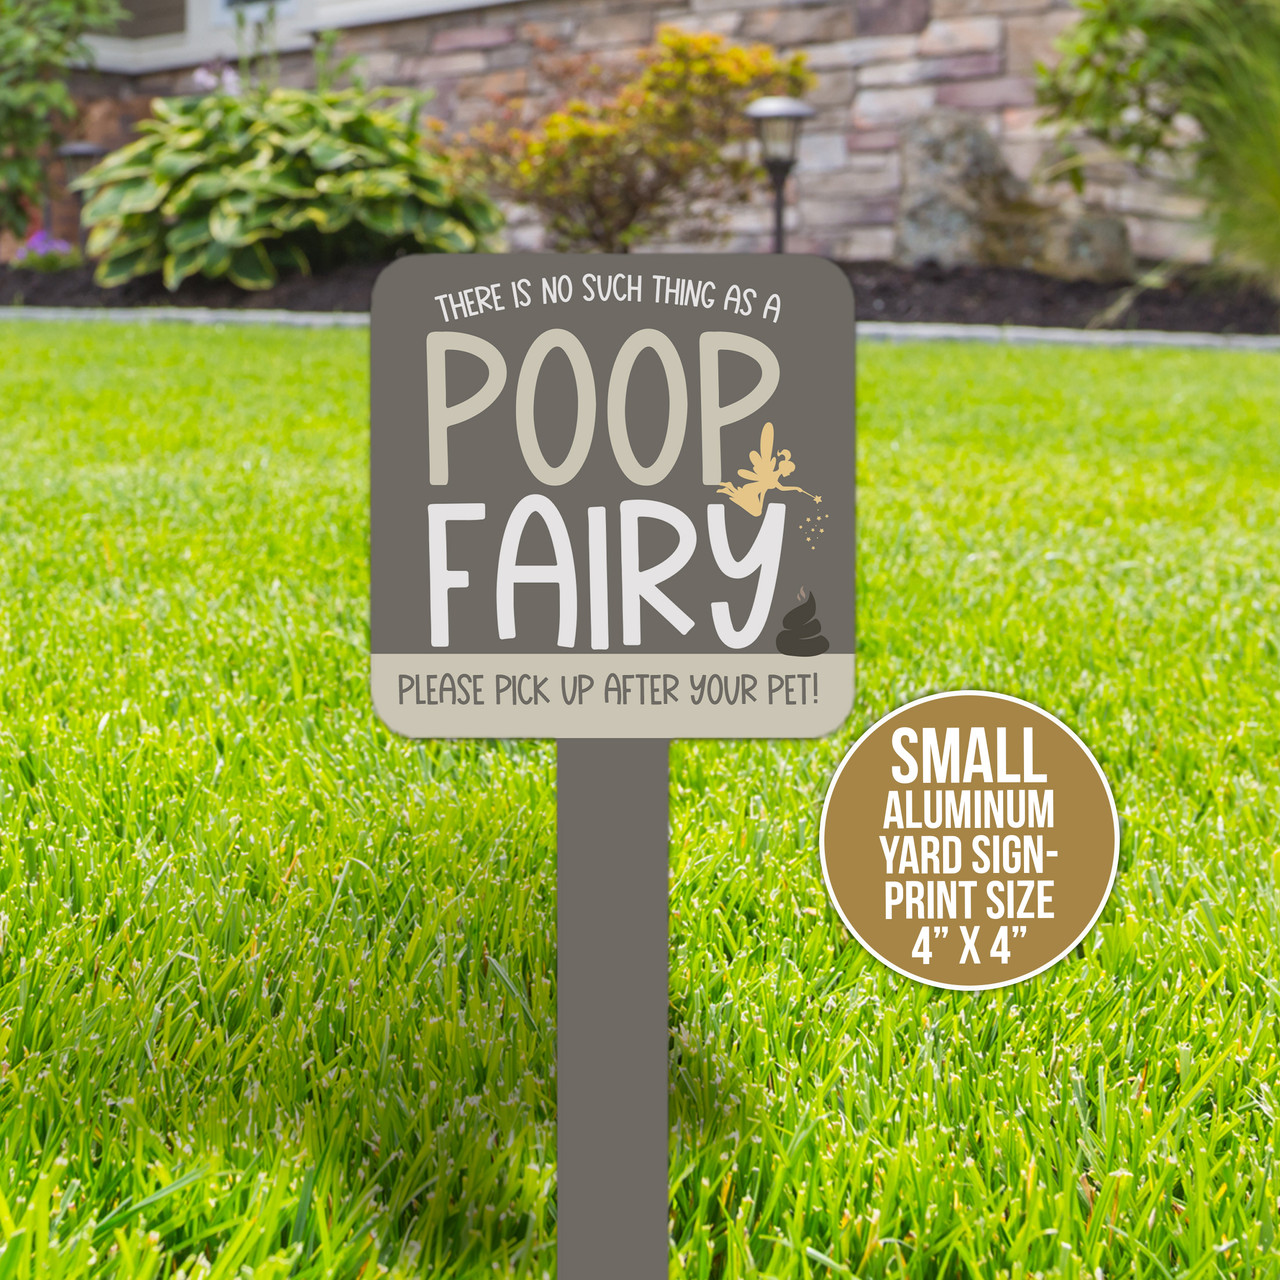 how do i disinfect my lawn after dog poop